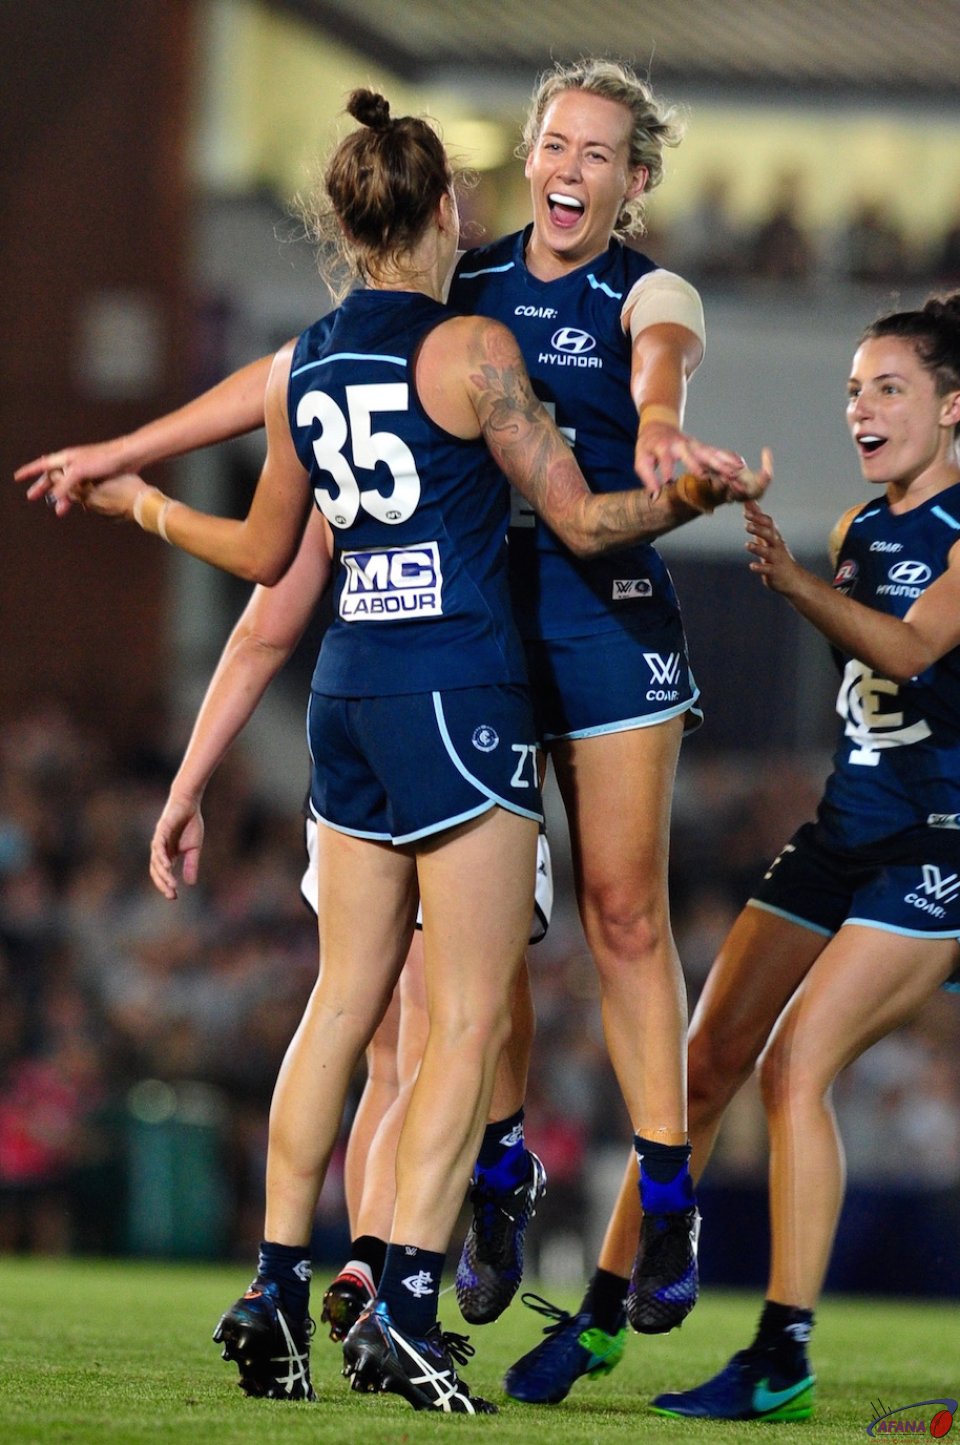 Jubilation at another Carlton goal by Bianca Jakobsson (35)